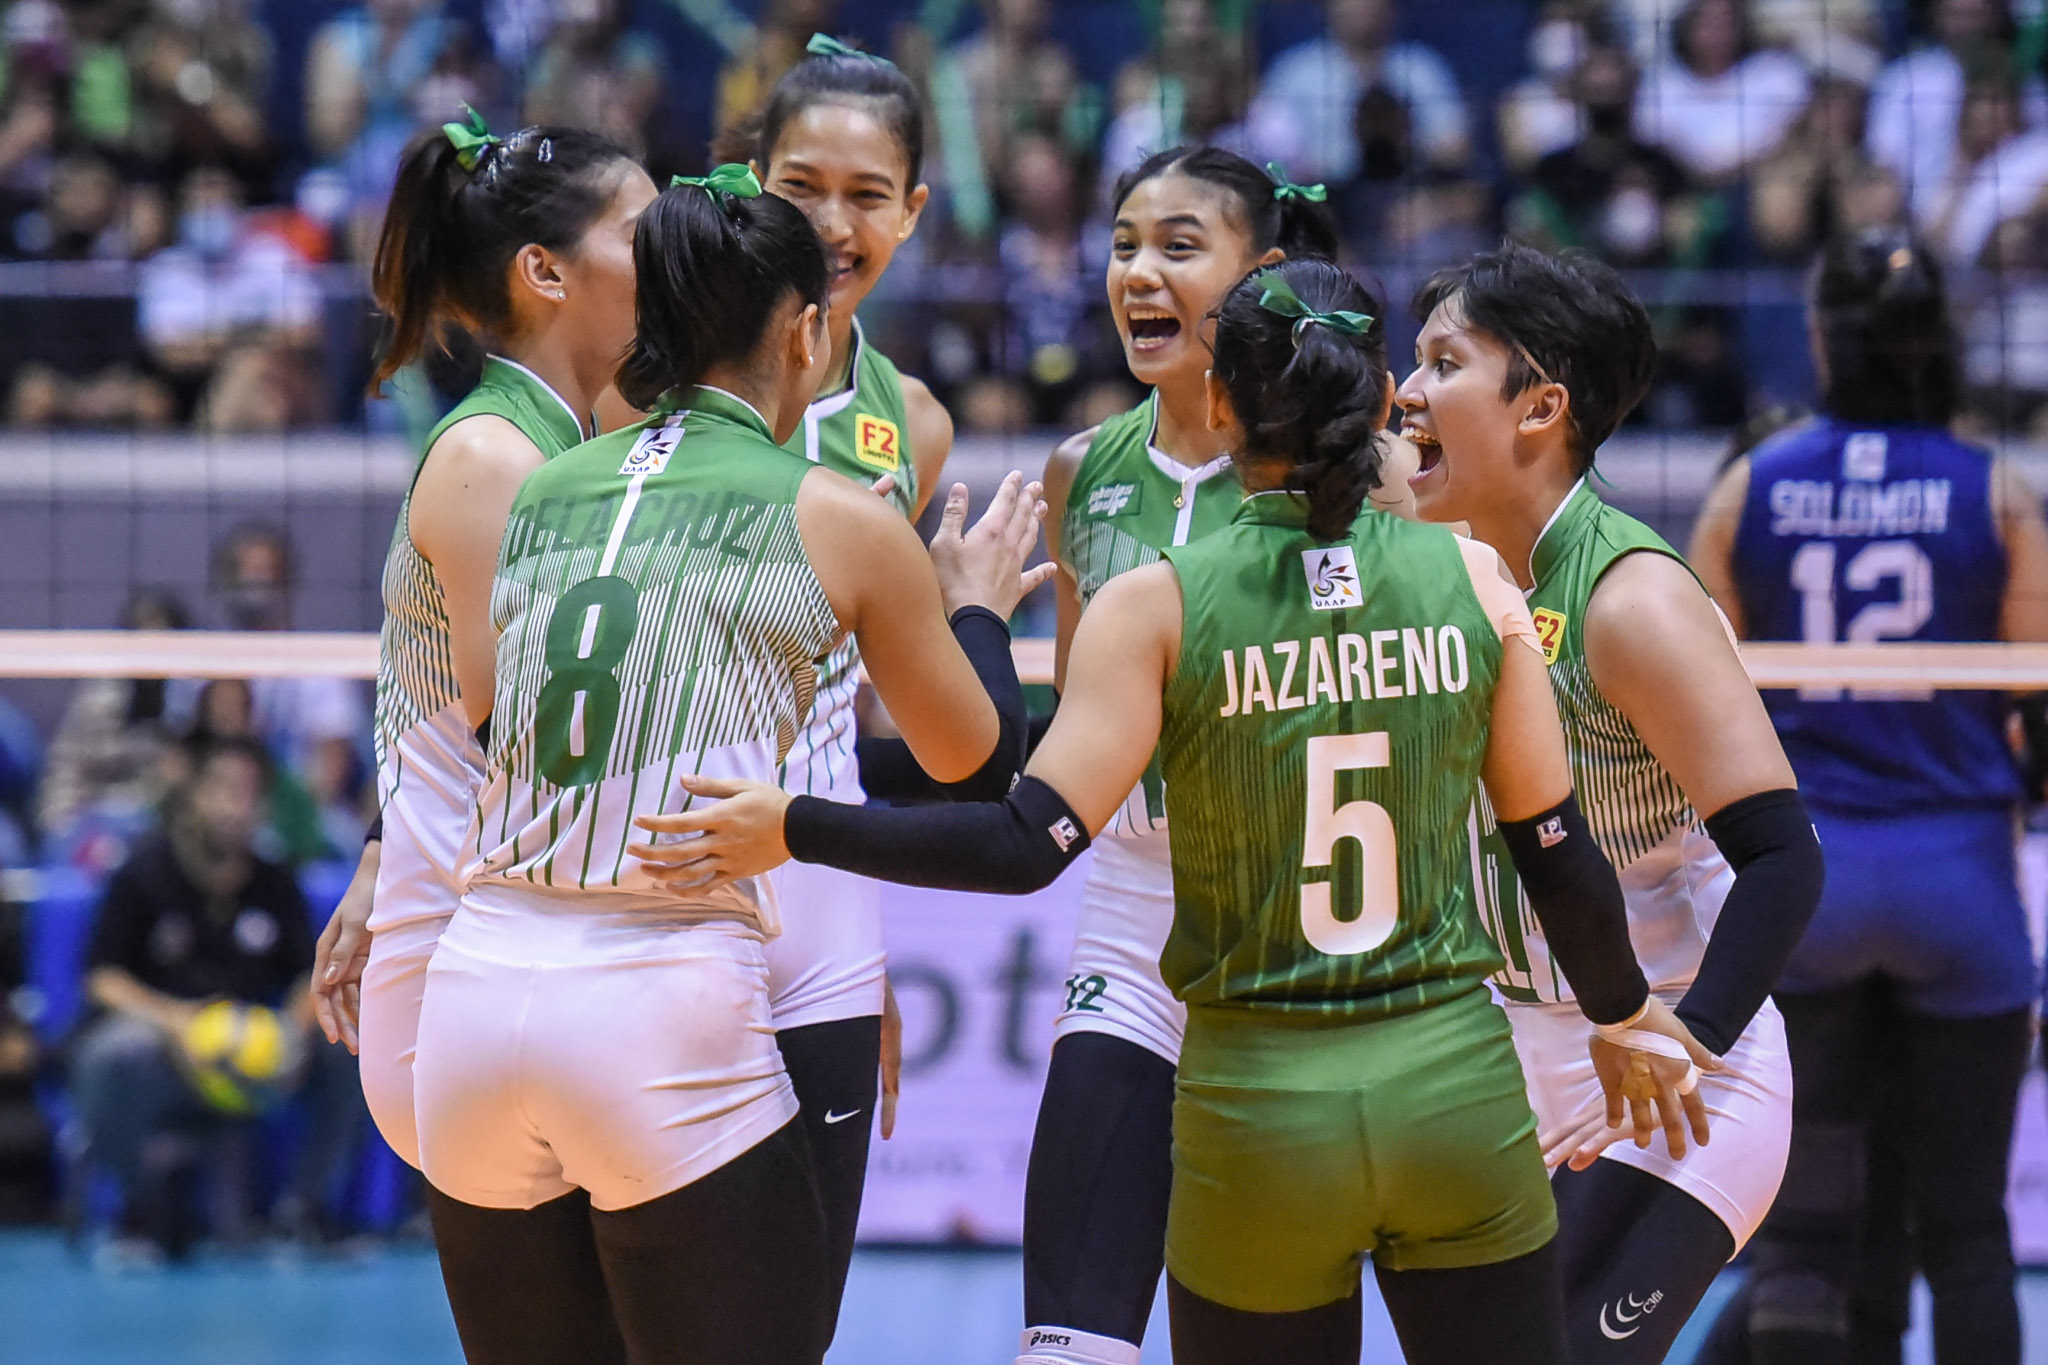 La Salle moves on cusp of UAAP womens volleyball title, overcomes NU in Game 1 Inquirer Sports